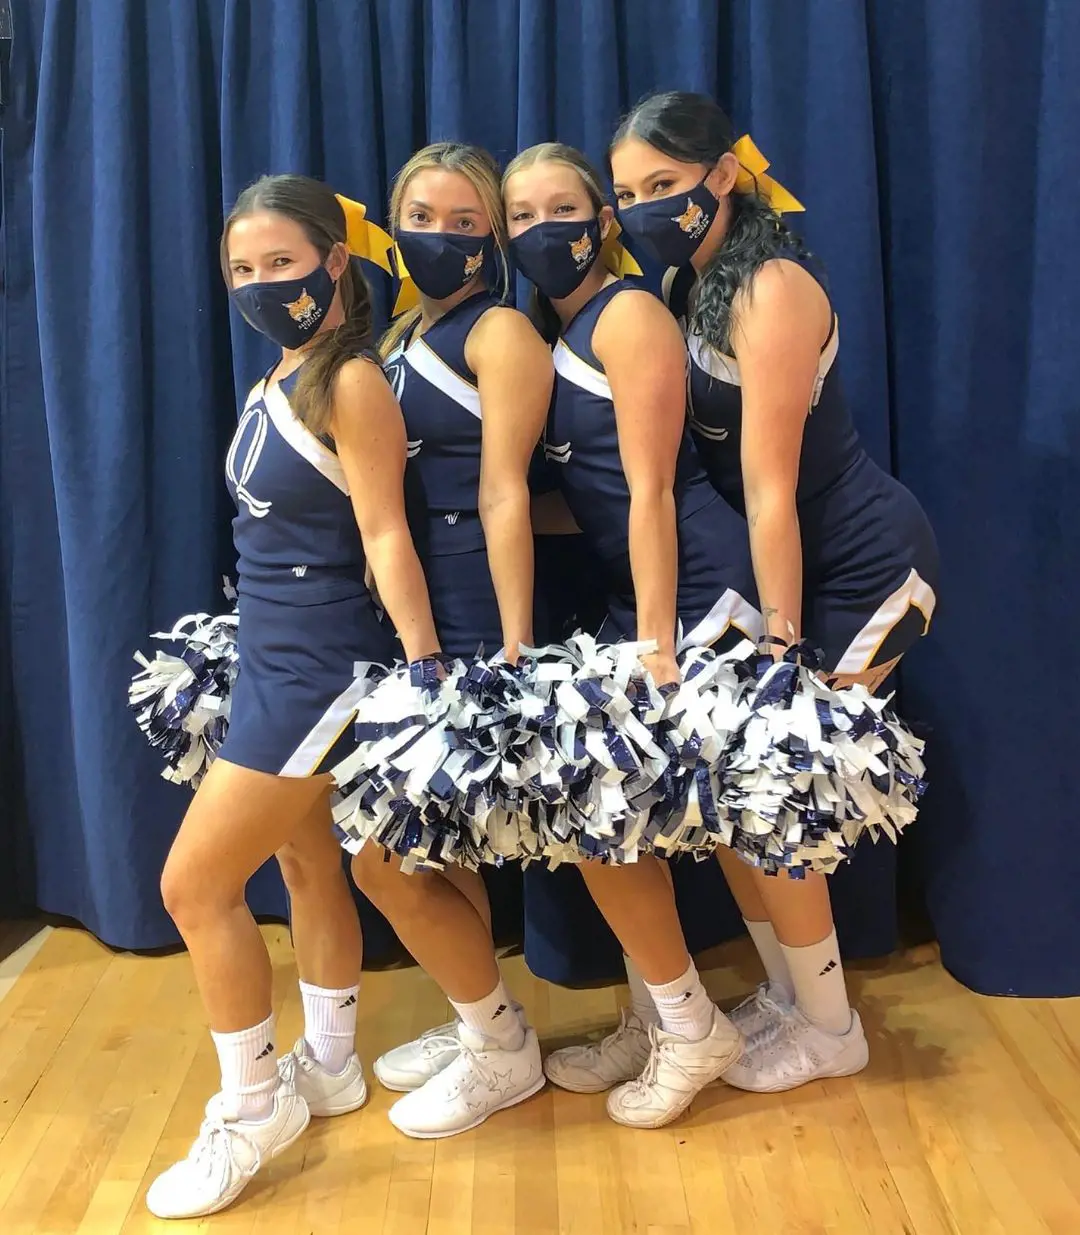 Cheerleaing Team Of The University Dressed In Blue With Yellow Bow Rubber Bands